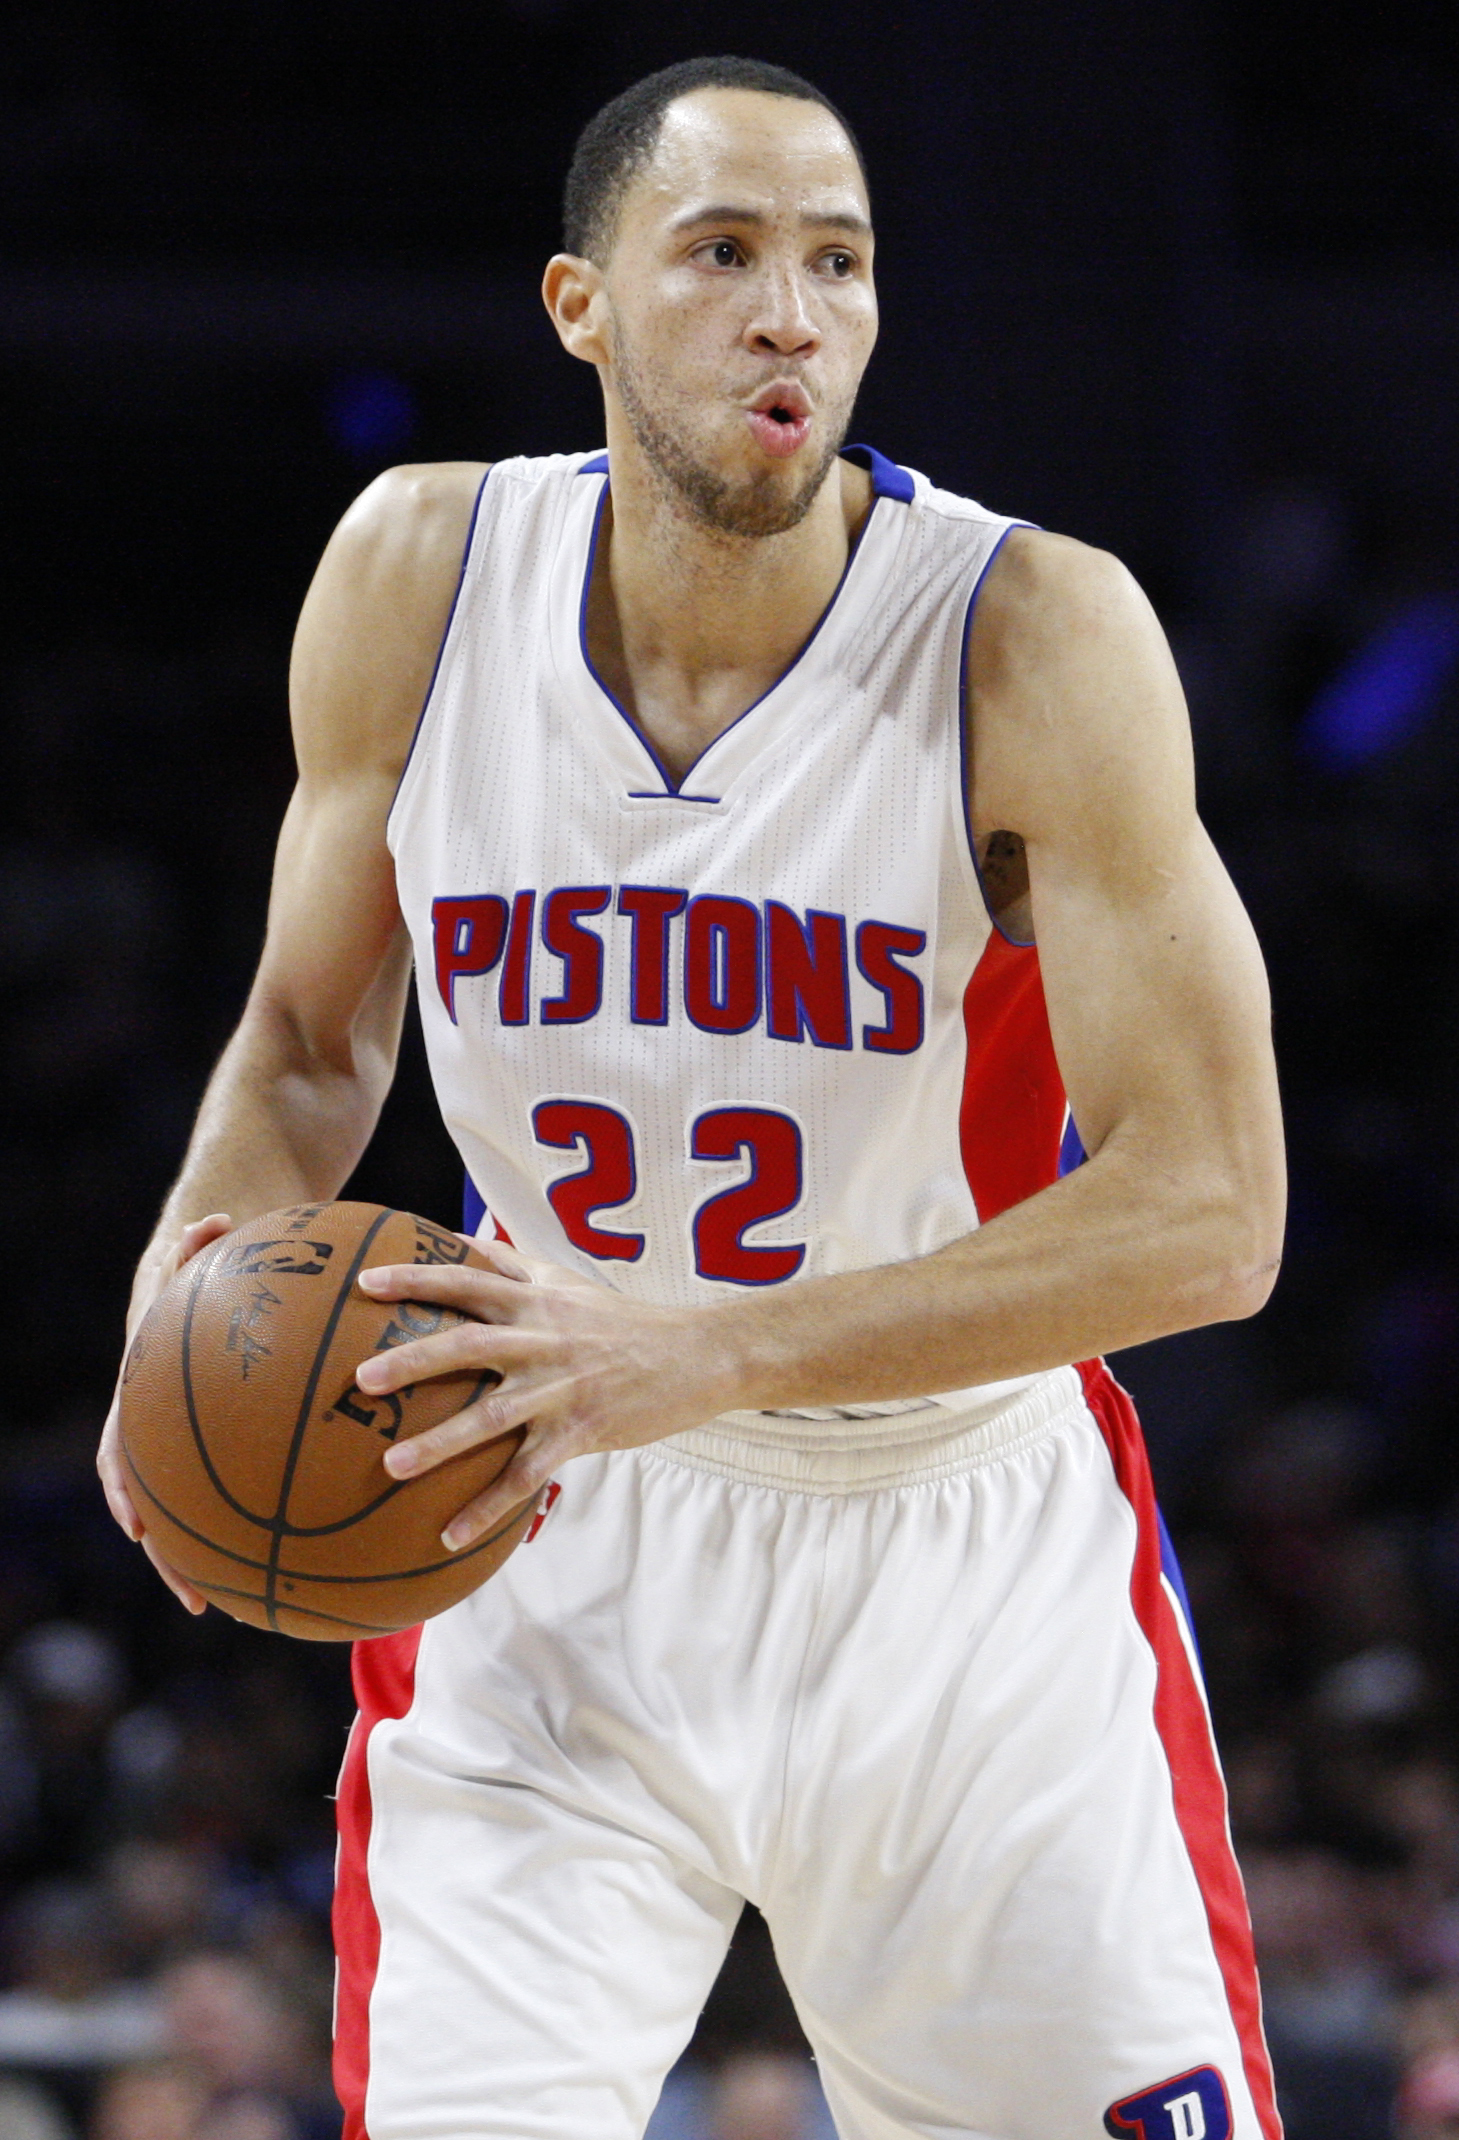 Tayshaun Prince screenshots, images and pictures - Giant Bomb